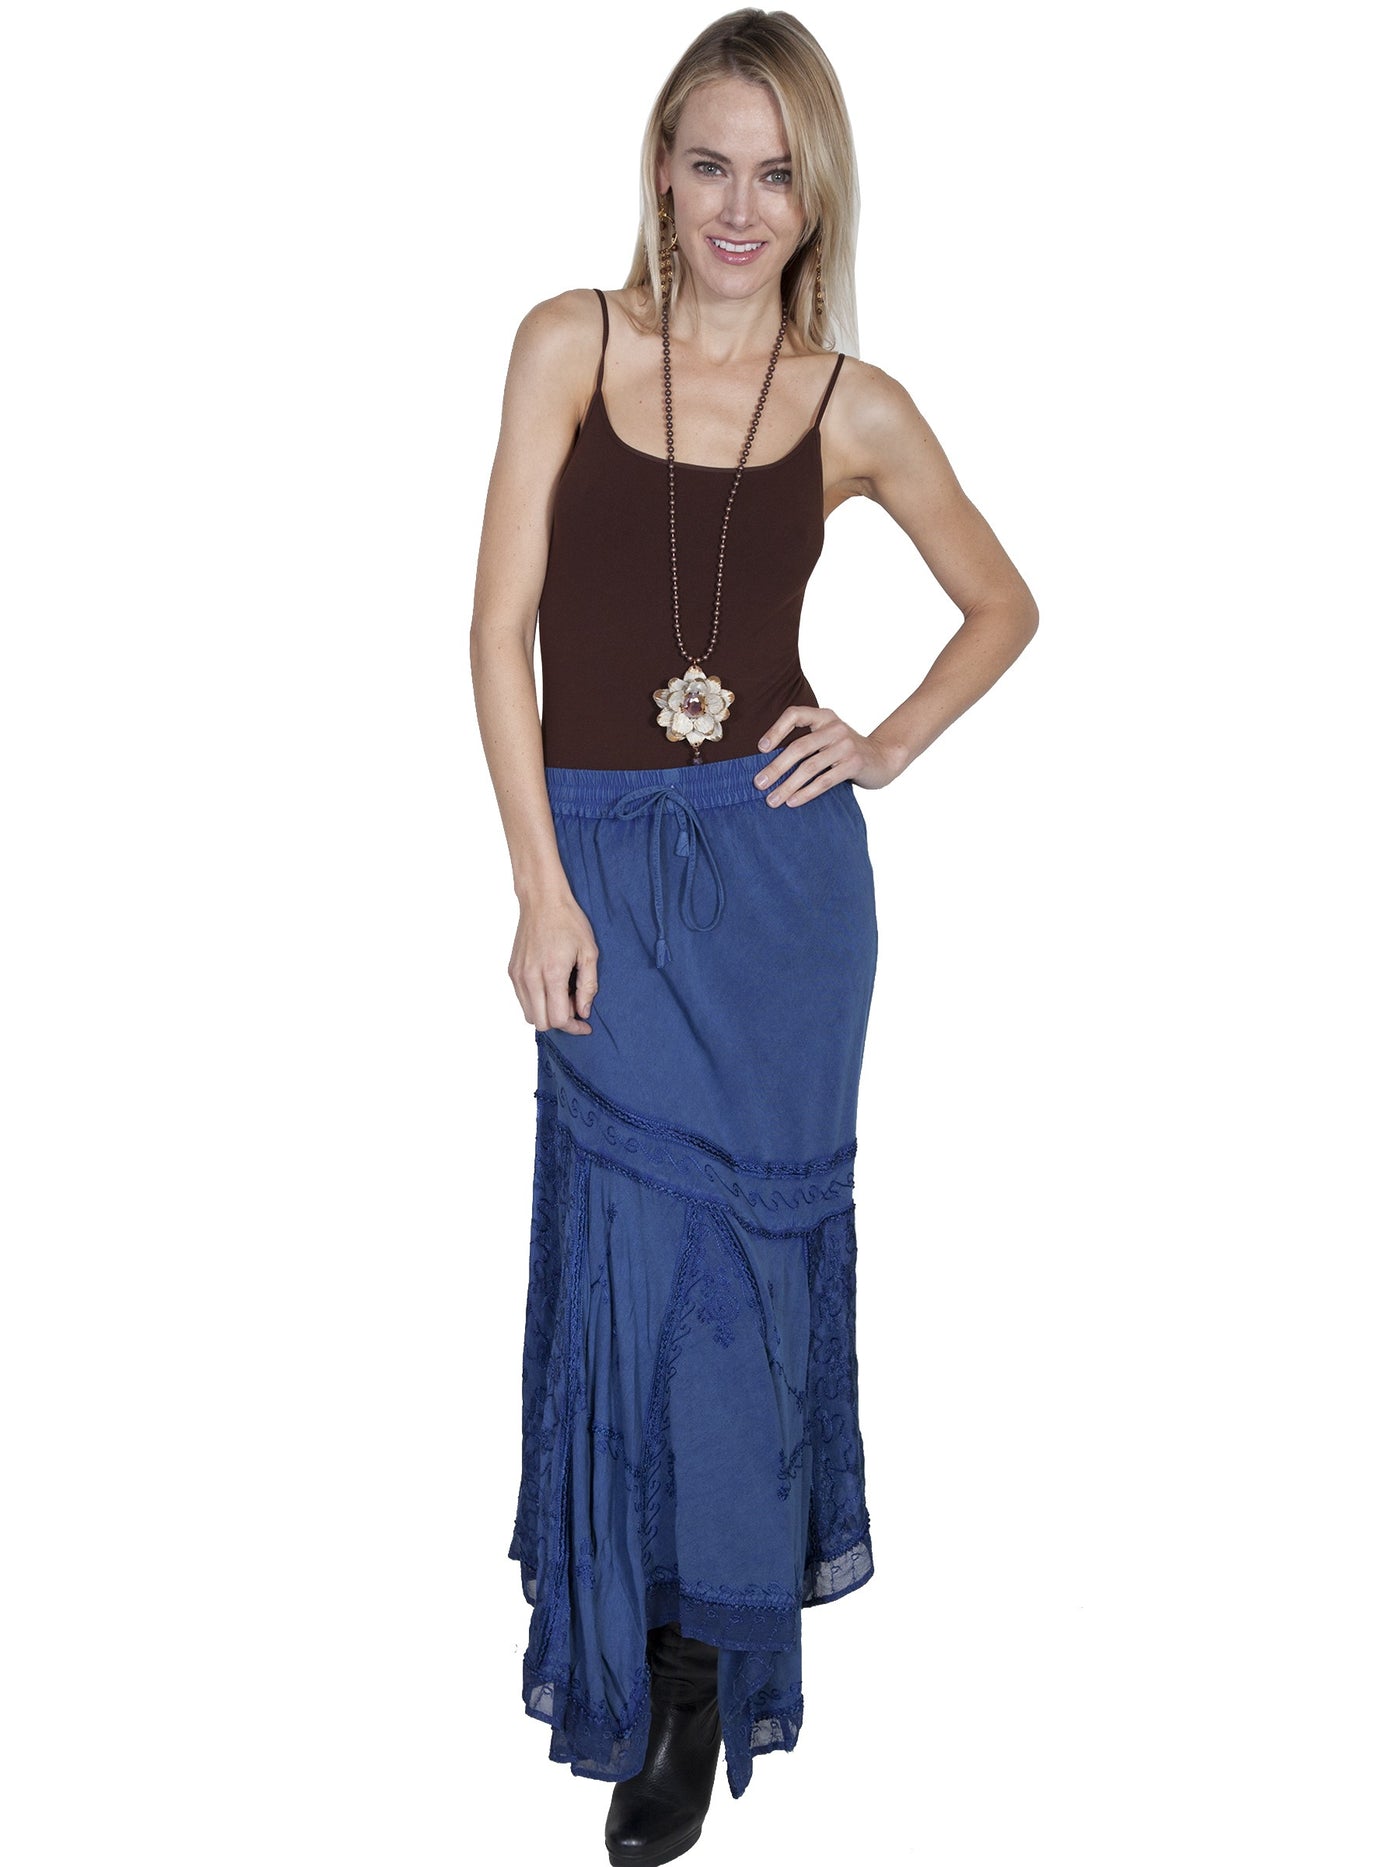 Western Style Multi-Fabric Skirt in Blue - SOLD OUT